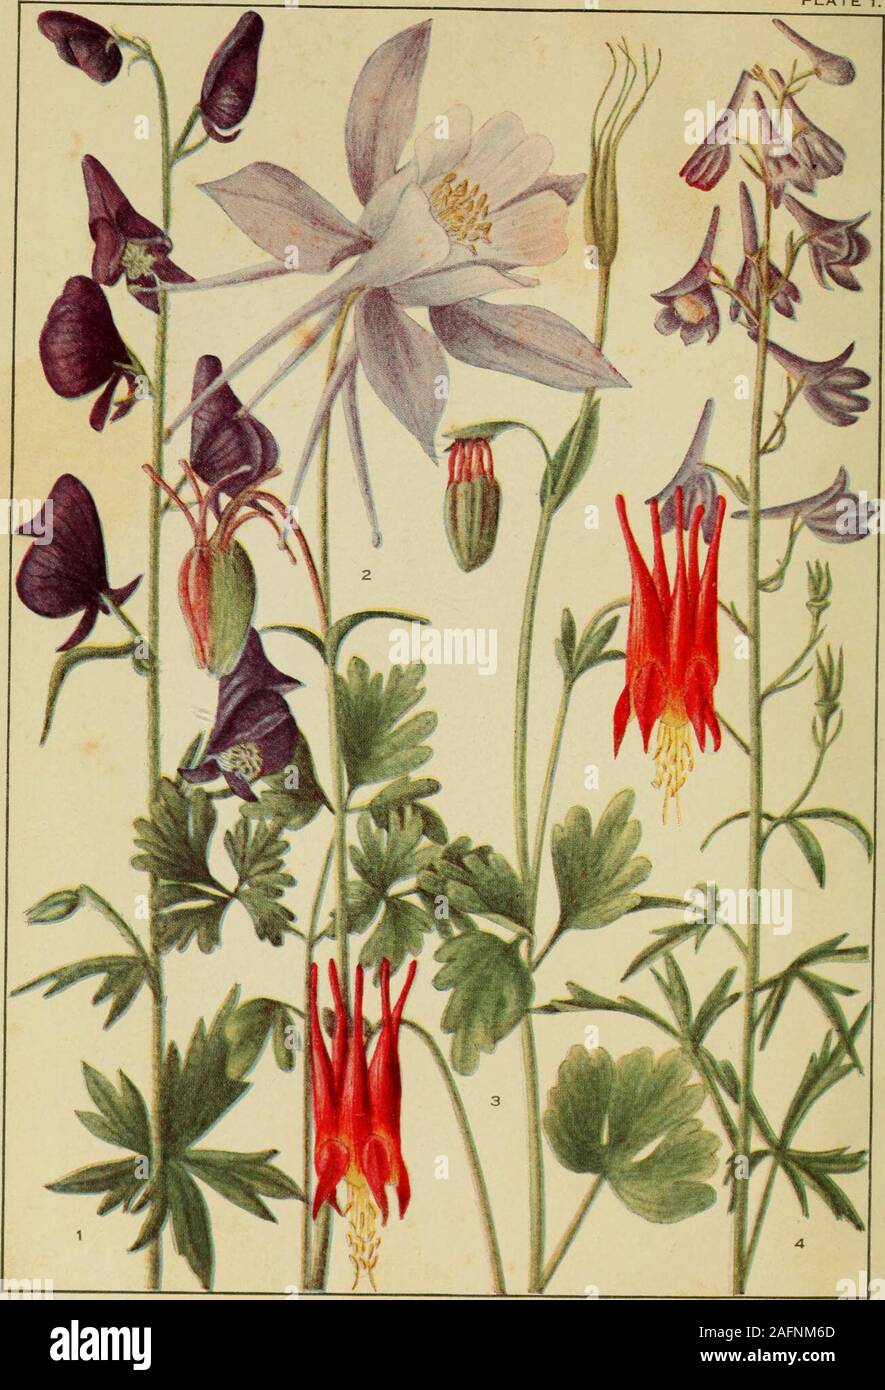 . Rocky Mountain flowers : an illustrated guide for plant-lovers and plant-users. EDITH S. CLEMENTS. PINXT ROCKY MOUNTAIN FLOWERS COCKAYNE. BOSTON ROCK TAIN iLUJ GUIDE FOR PL ) PLANT-US! TFIVE PLATES IN COLOR ANDENTY-TWO PLATES IN BEi&FJfMO WHITEBUTTERCUP FAMILY 1. Aconituni columbiaiuim : Monkshood 2. Aquilesria coerulea: Blue Columbine 4. Dephiniitm g&JffiSKfflE1! Larkspur DIRECTOR OF THE PIKES PEAK ALPfNE LABORATORY •D &lt;tz ci FIELD EDITION ?N COM!rockymou00clem Stock Photo